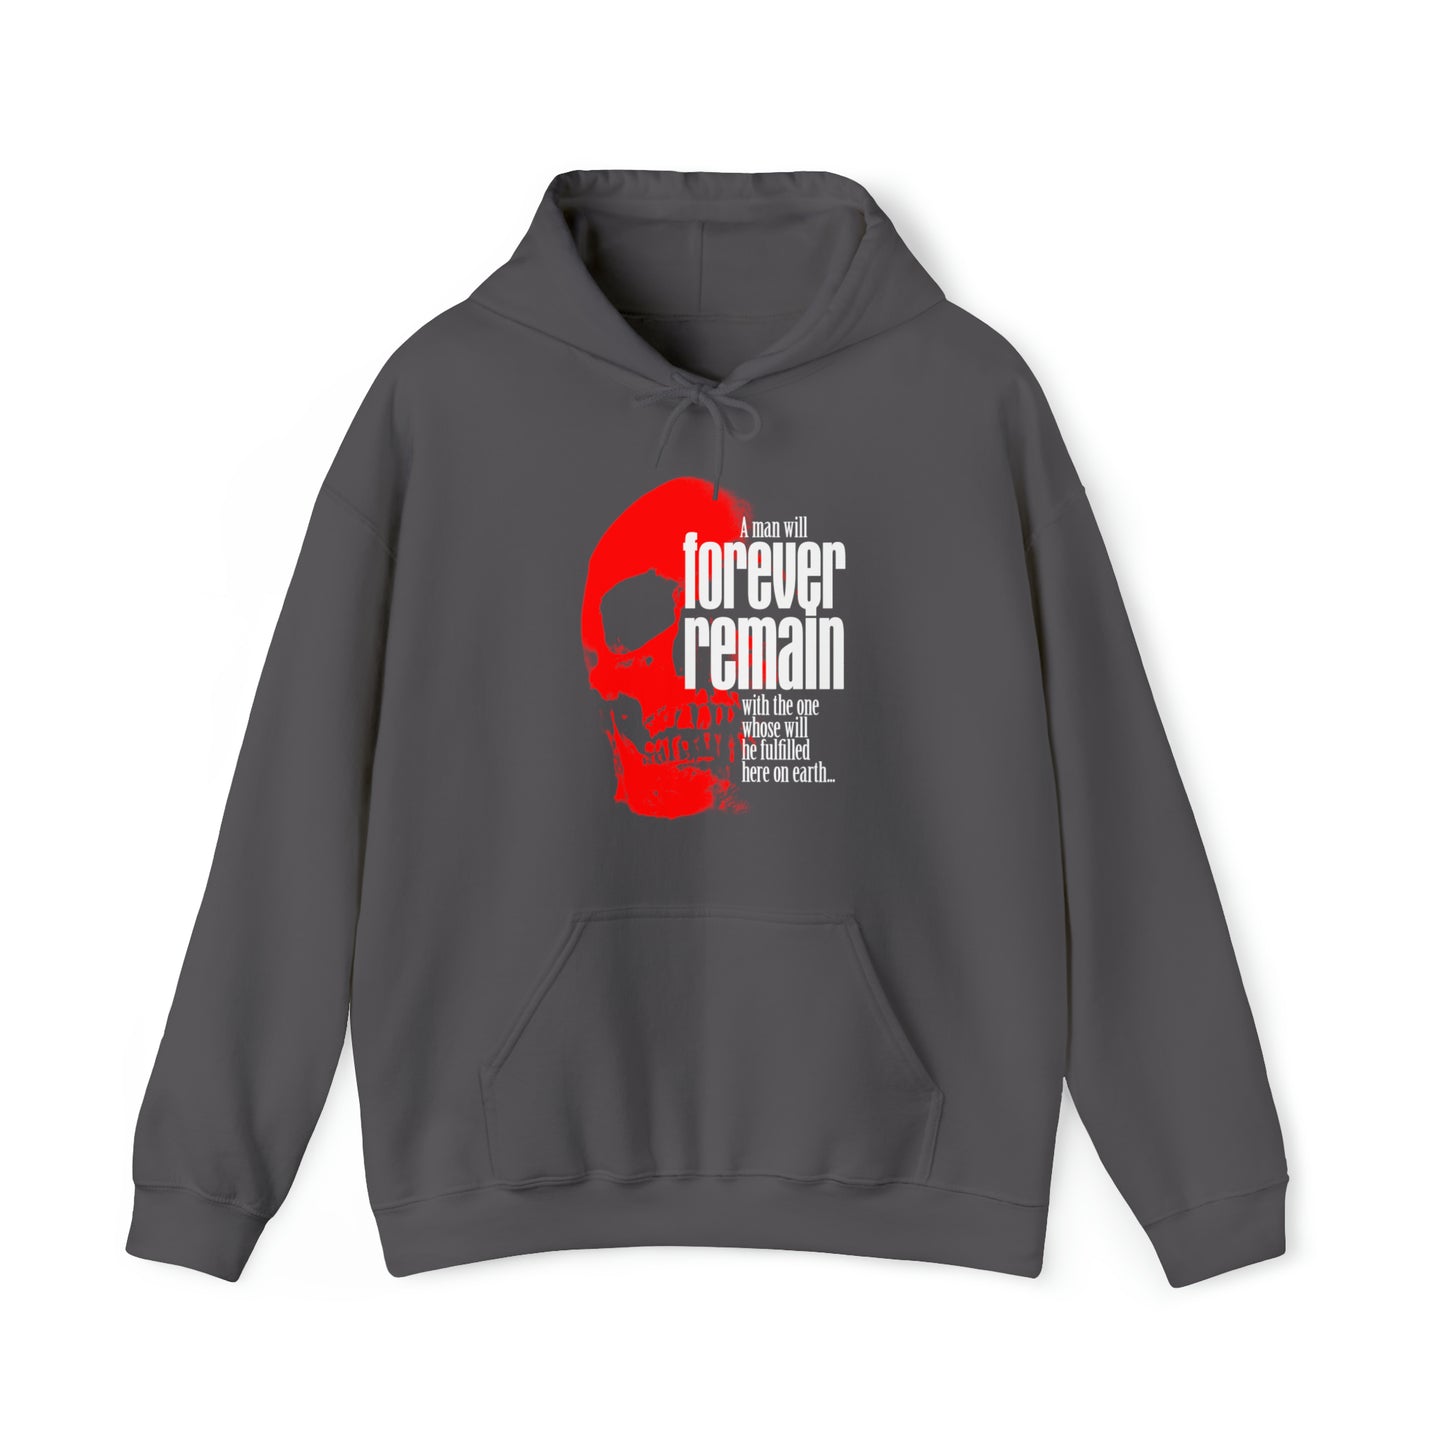 A Man Will Forever Remain No. 1 | Orthodox Christian Hoodie / Hooded Sweatshirt